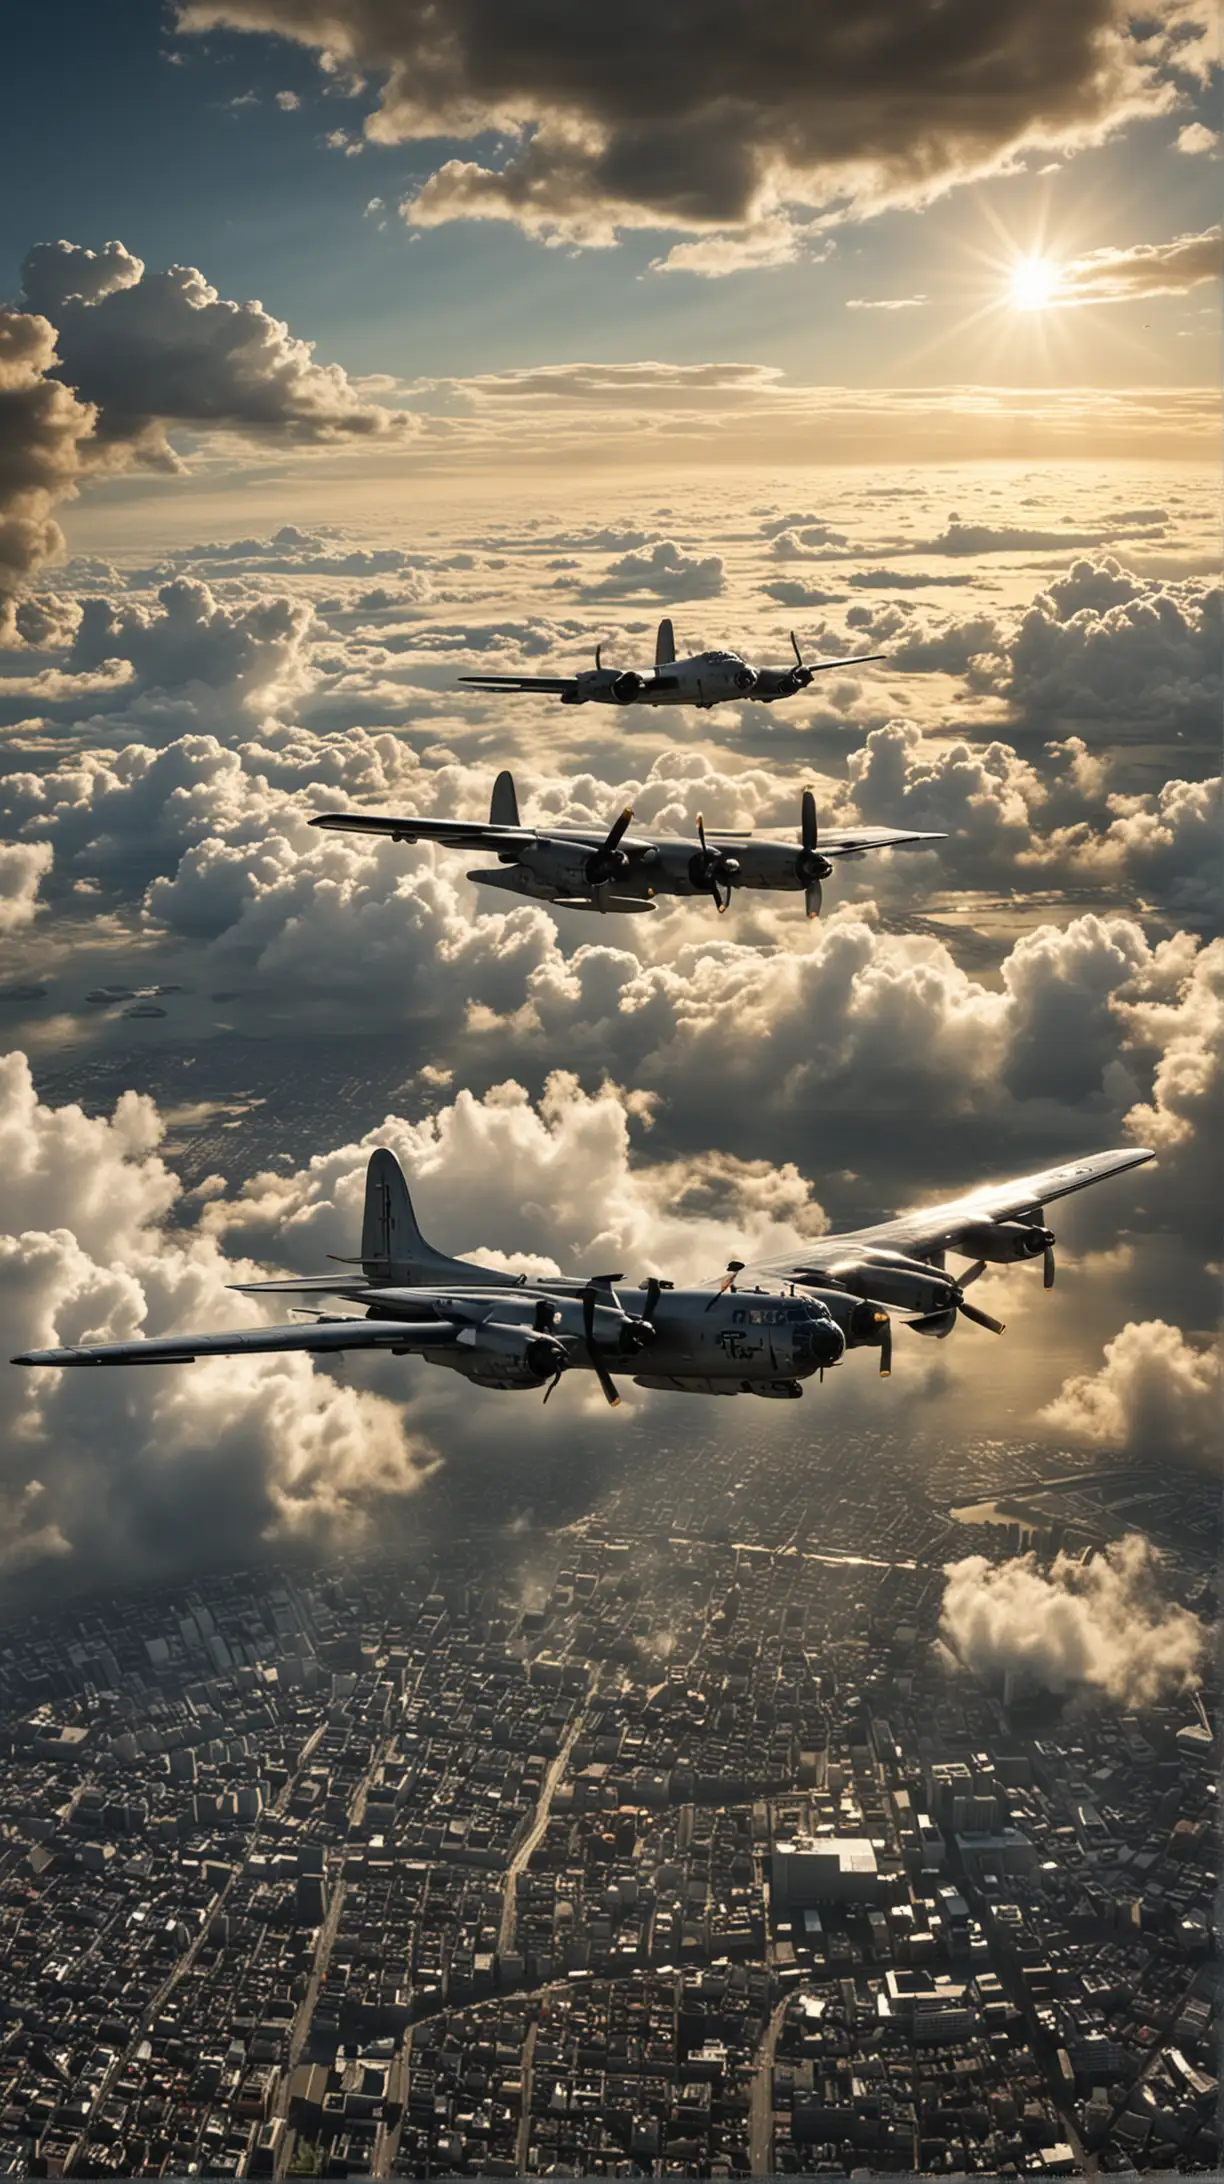 Create a dramatic and detailed image of the American B-29 bomber, "Enola Gay," approaching the city of Hiroshima in the sky. The scene should convey a sense of impending doom and historical significance.

Aircraft in Detail: Depict the B-29 bomber "Enola Gay" in flight, with its distinctive design clearly visible. The aircraft should be flying at a high altitude, with a clear view of its underbelly where the atomic bomb "Little Boy" is housed.
Sky and Clouds: Show the plane soaring through a partly cloudy sky, with the sun rising or early morning light casting a soft glow on the aircraft. The clouds should add depth and dimension to the sky, enhancing the dramatic effect.
City Below: Provide a glimpse of Hiroshima far below, with its buildings, roads, and landmarks faintly visible. The city should appear peaceful and unaware of the impending catastrophe.
Contrasting Emotions: Capture the contrast between the serene beauty of the morning sky and the ominous presence of the bomber, foreshadowing the destruction to come.
Historical Context: Add subtle elements that evoke the historical context, such as the date "August 6, 1945" subtly integrated into the image, or a faint shadow of the aircraft on the ground below, hinting at the momentous event about to unfold. colorful 